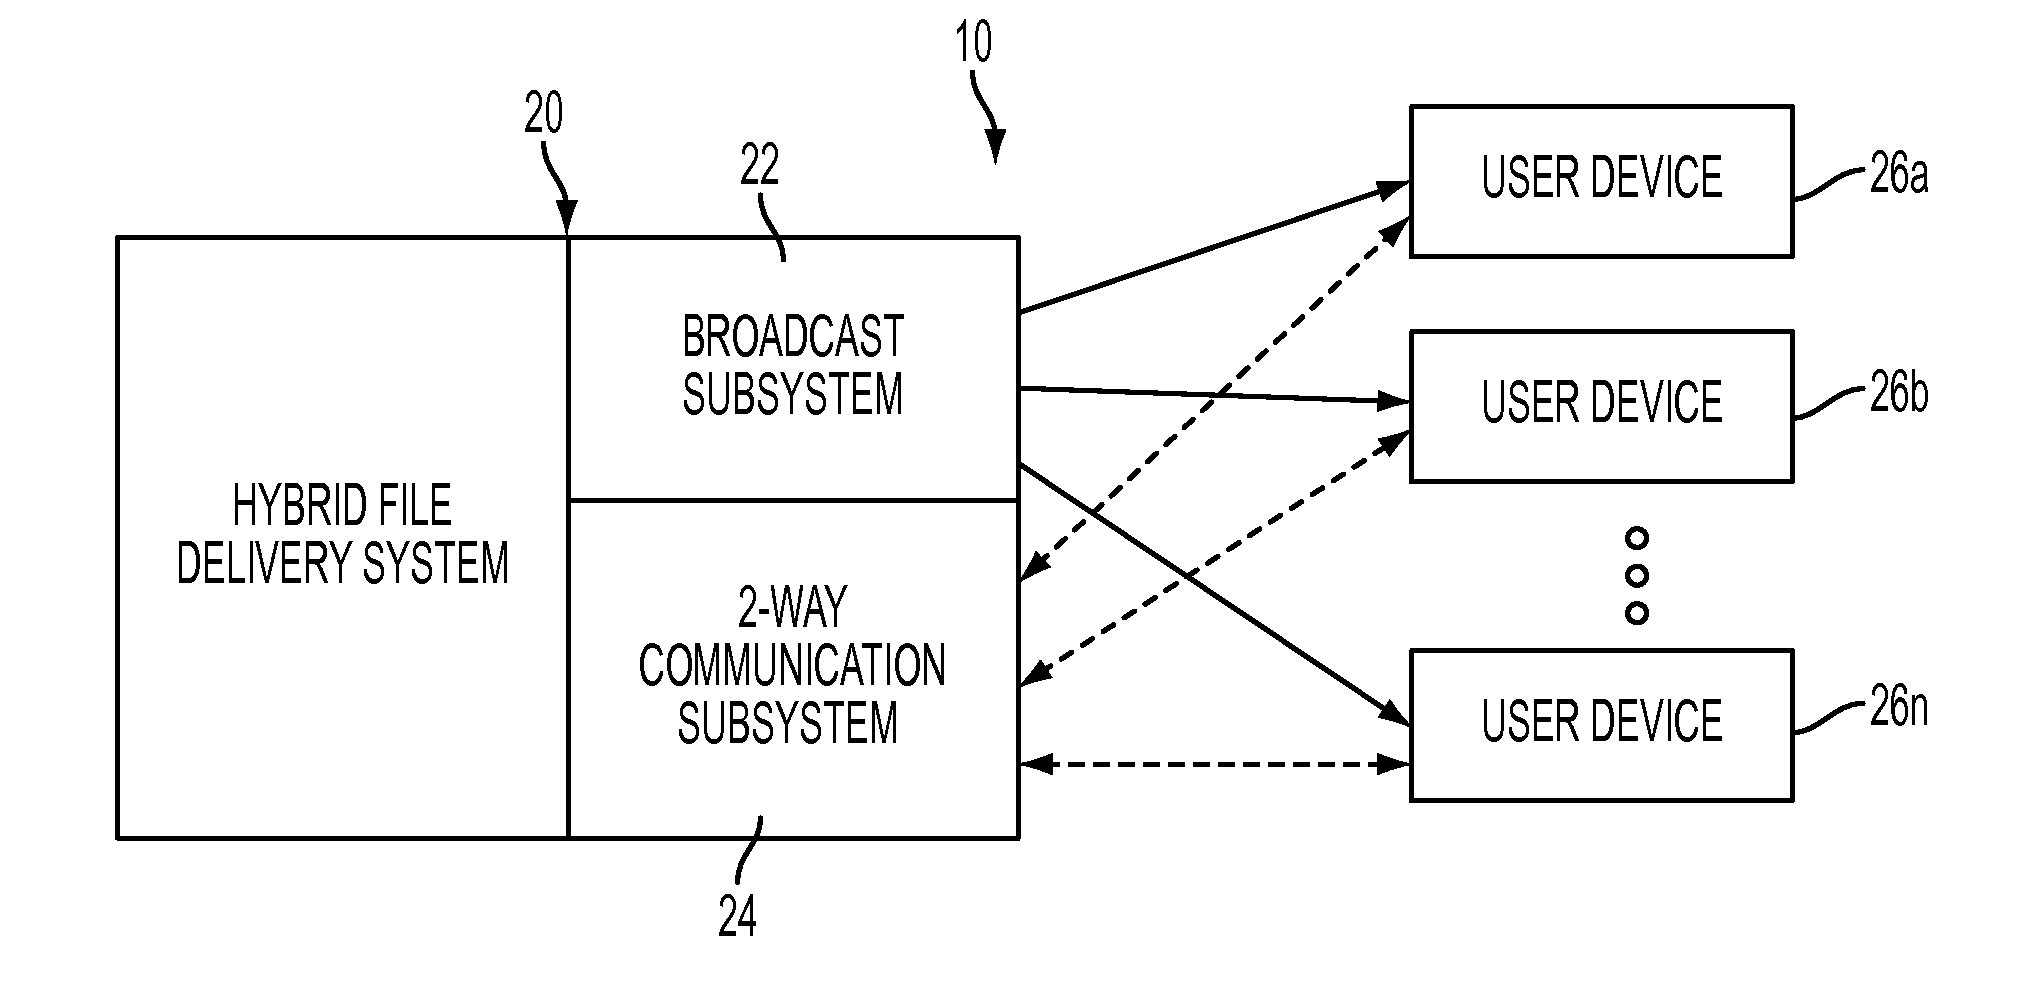 Systems and Methods for Cost Effective Distribution of Files to User Devices Using Combination of Broadcast and Two-Way Communication Paths